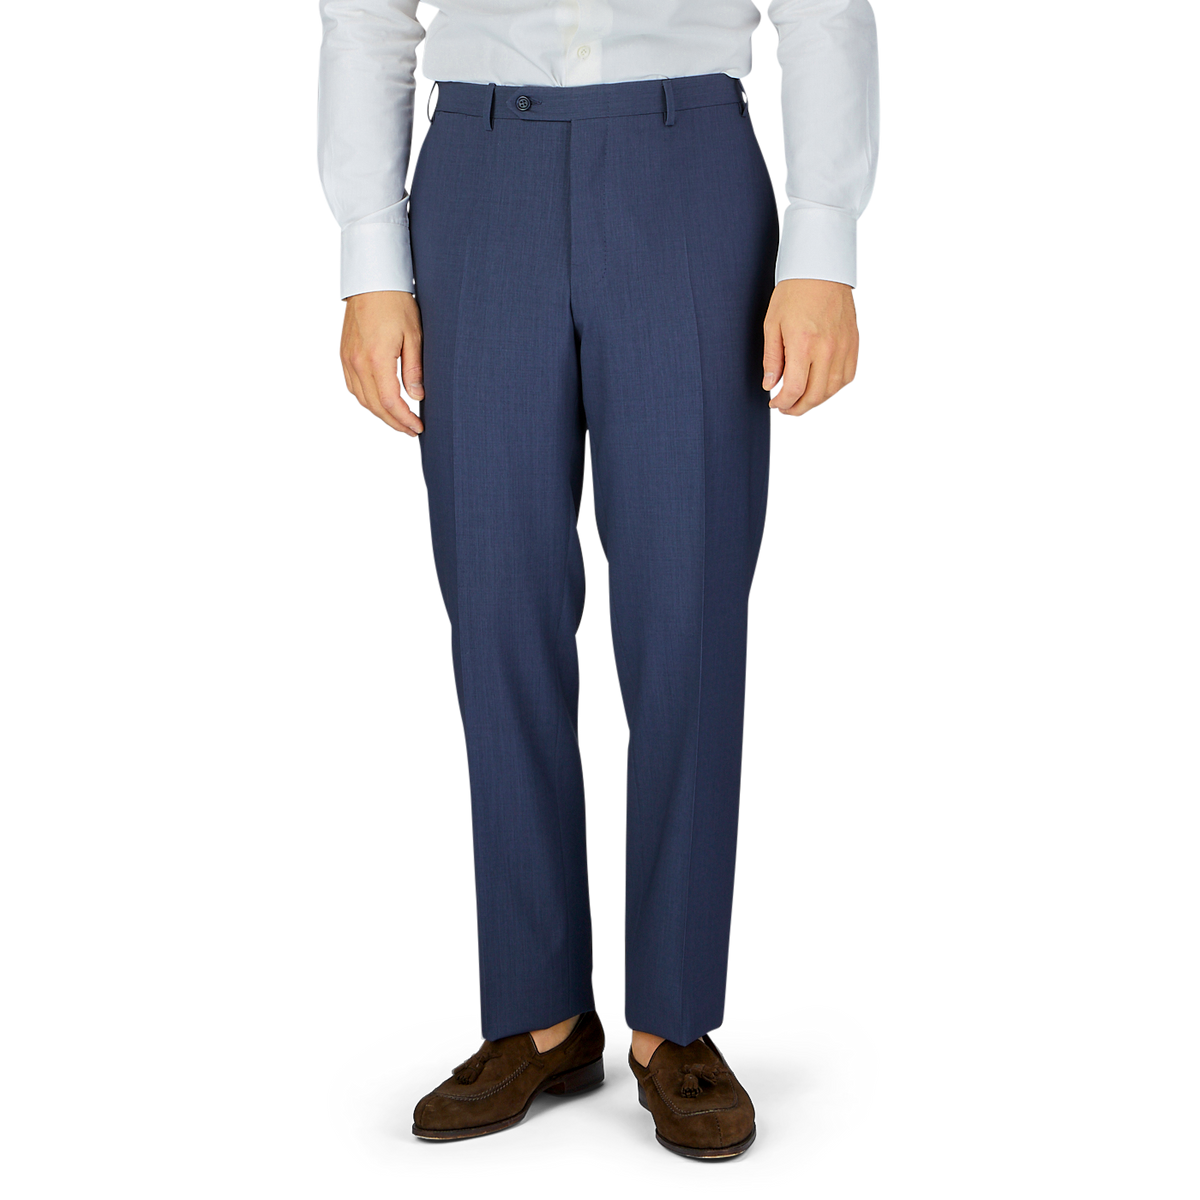 Man standing in navy Canali Slate Blue Semi-Plain Wool Flat Front Trousers paired with brown shoes.